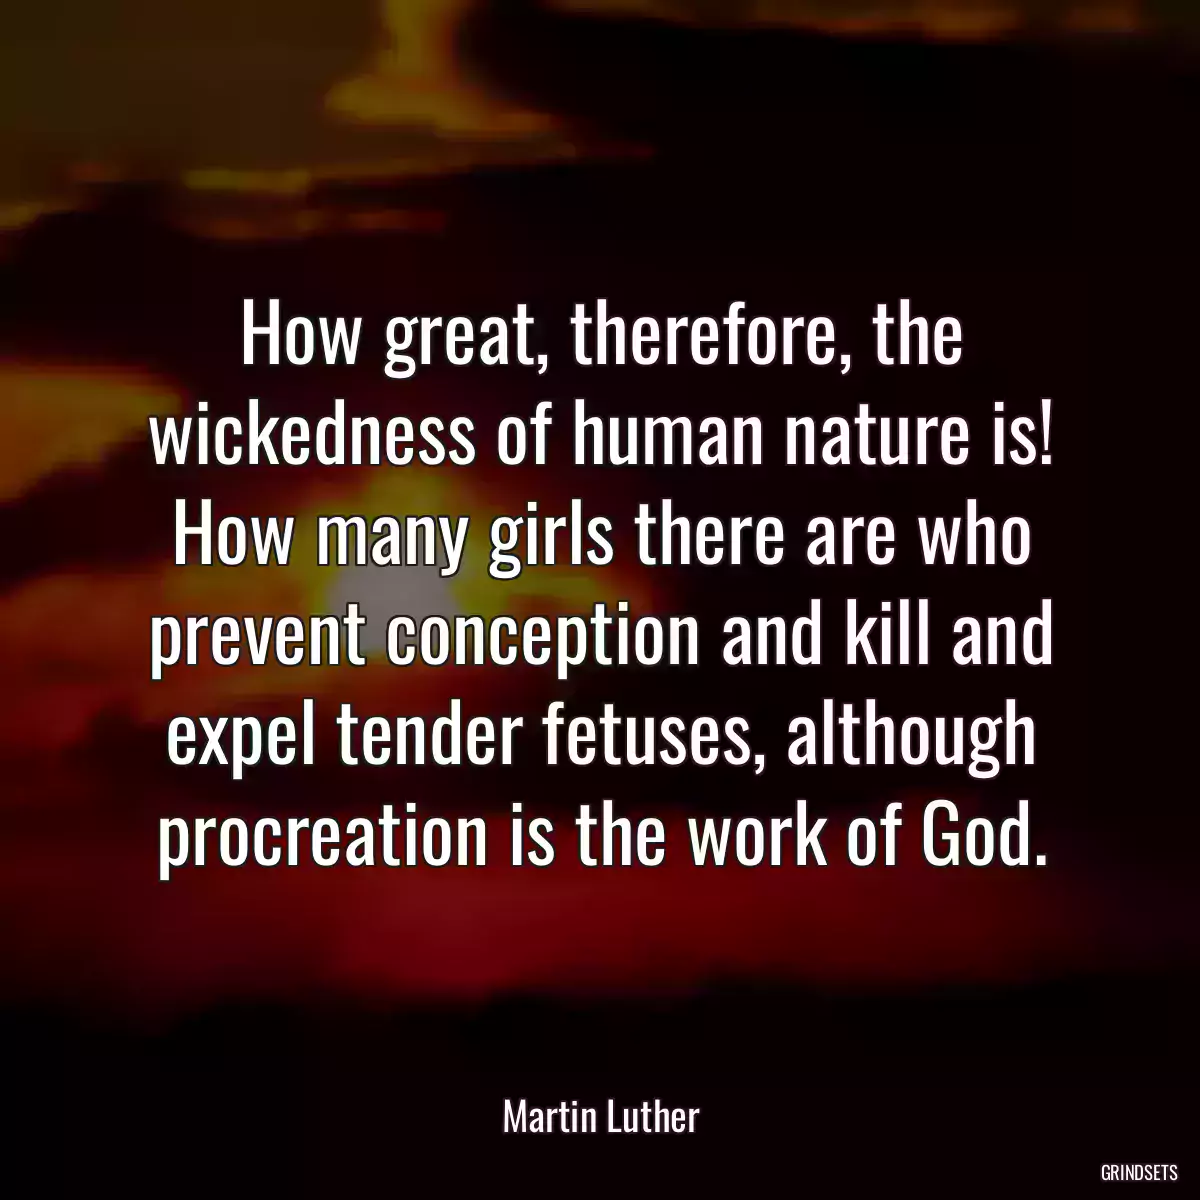 How great, therefore, the wickedness of human nature is! How many girls there are who prevent conception and kill and expel tender fetuses, although procreation is the work of God.